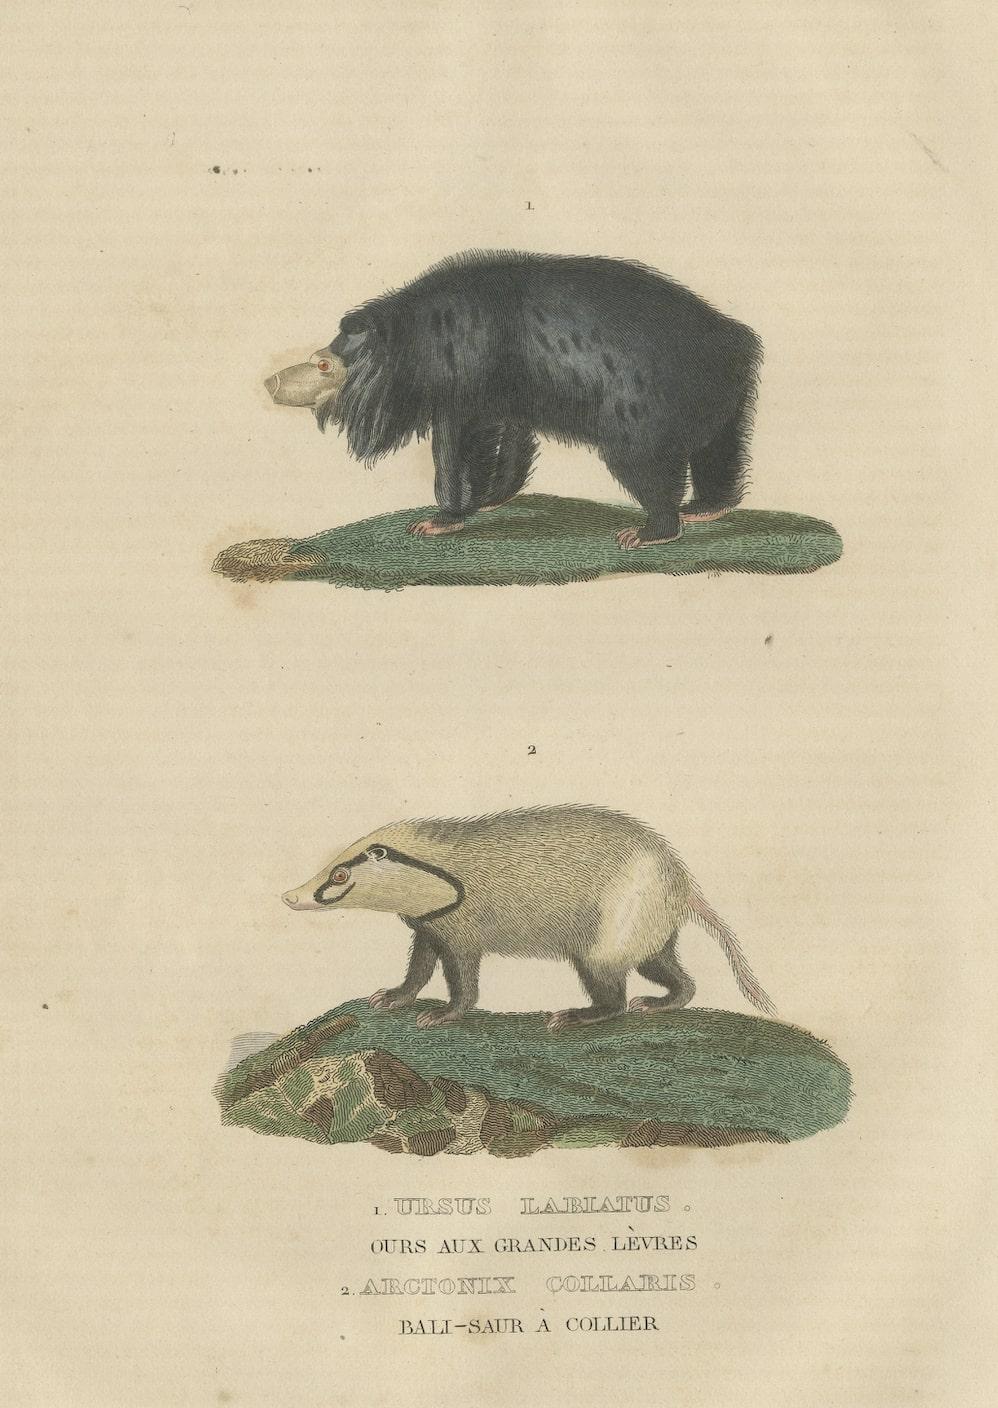 Interesting original rare hand-colored print of two animals, but maybe wrong names have been used at the time.

It seems there might be a mix-up in the species names or terminology provided. Arctonyx collaris refers to the Hog Badger, a mustelid